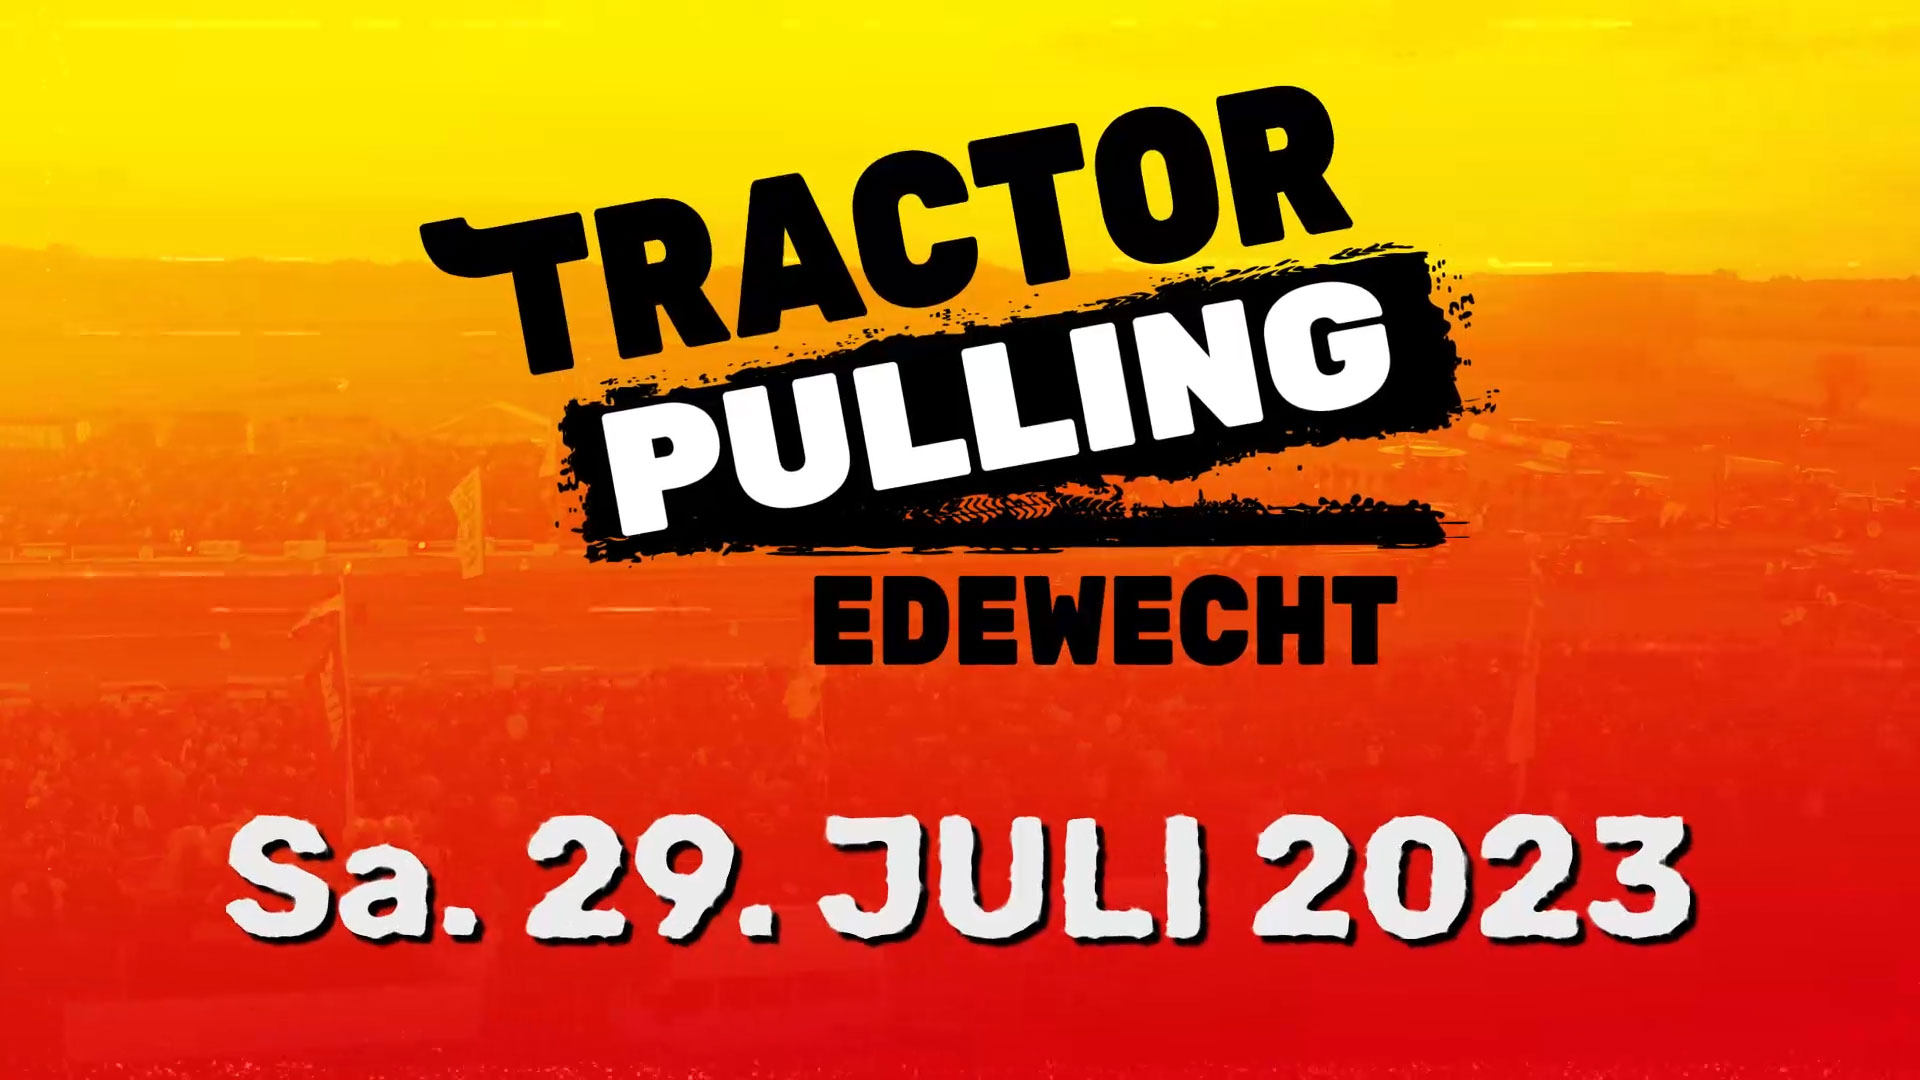 Tractor Pulling Pull not Edewecht is Full — enough